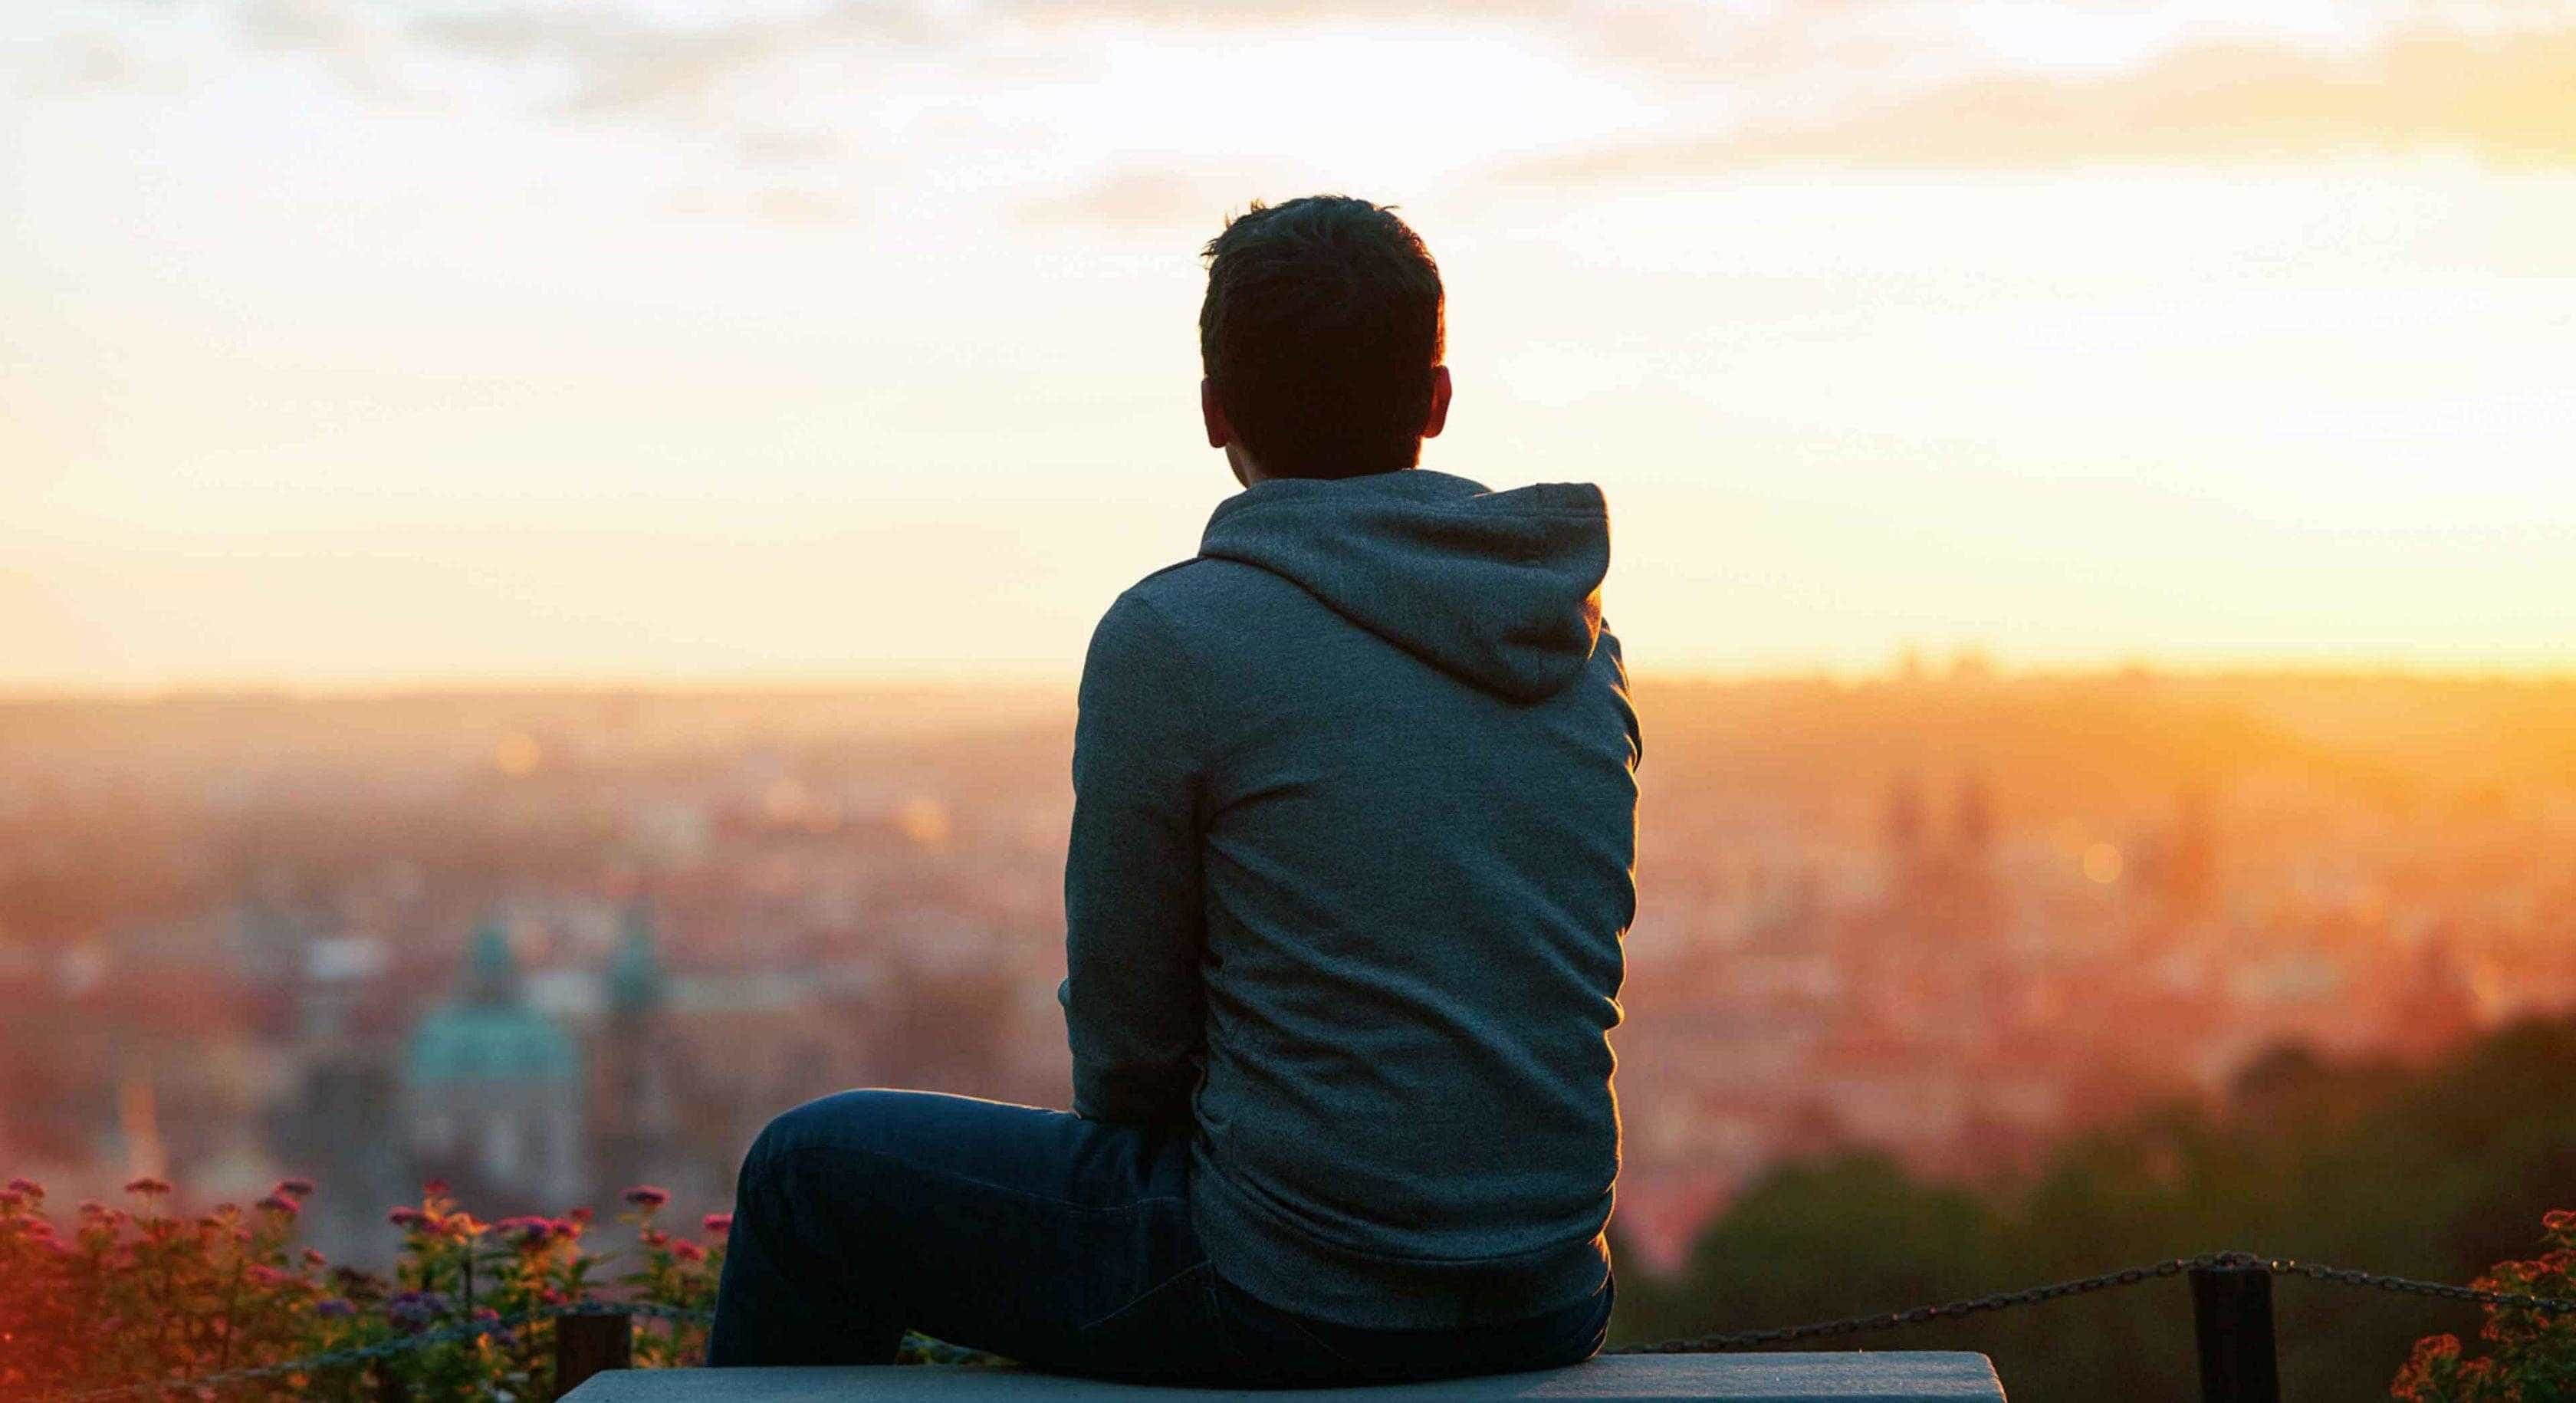 25 Things To Do When You Feel Alone and Lonely